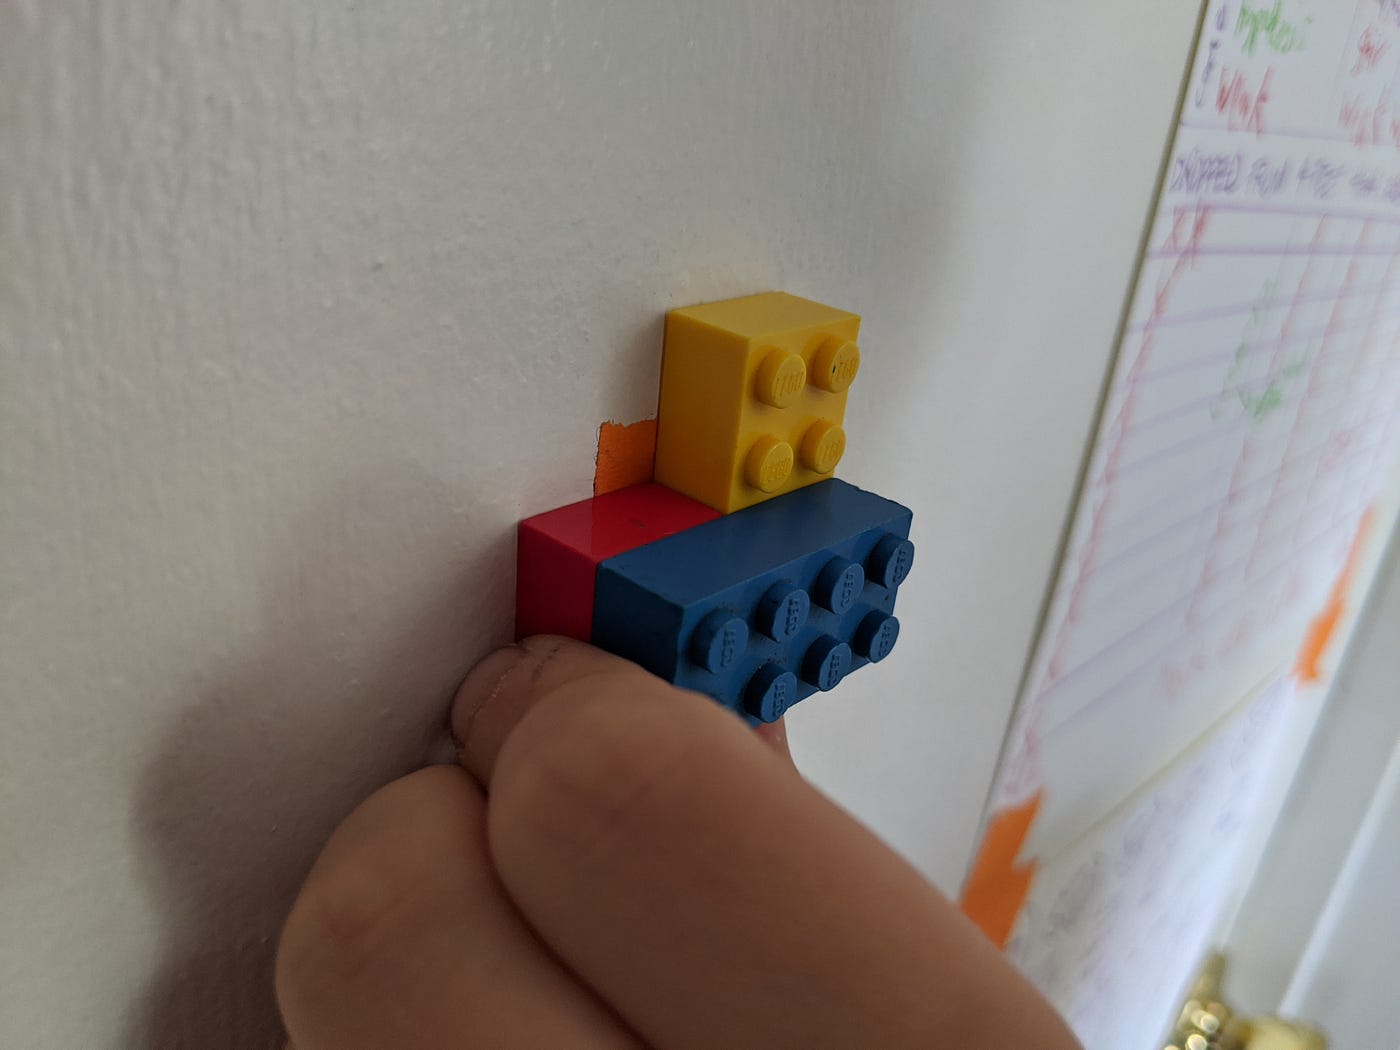 How Many Combinations Are Possible Using 6 LEGO Bricks?